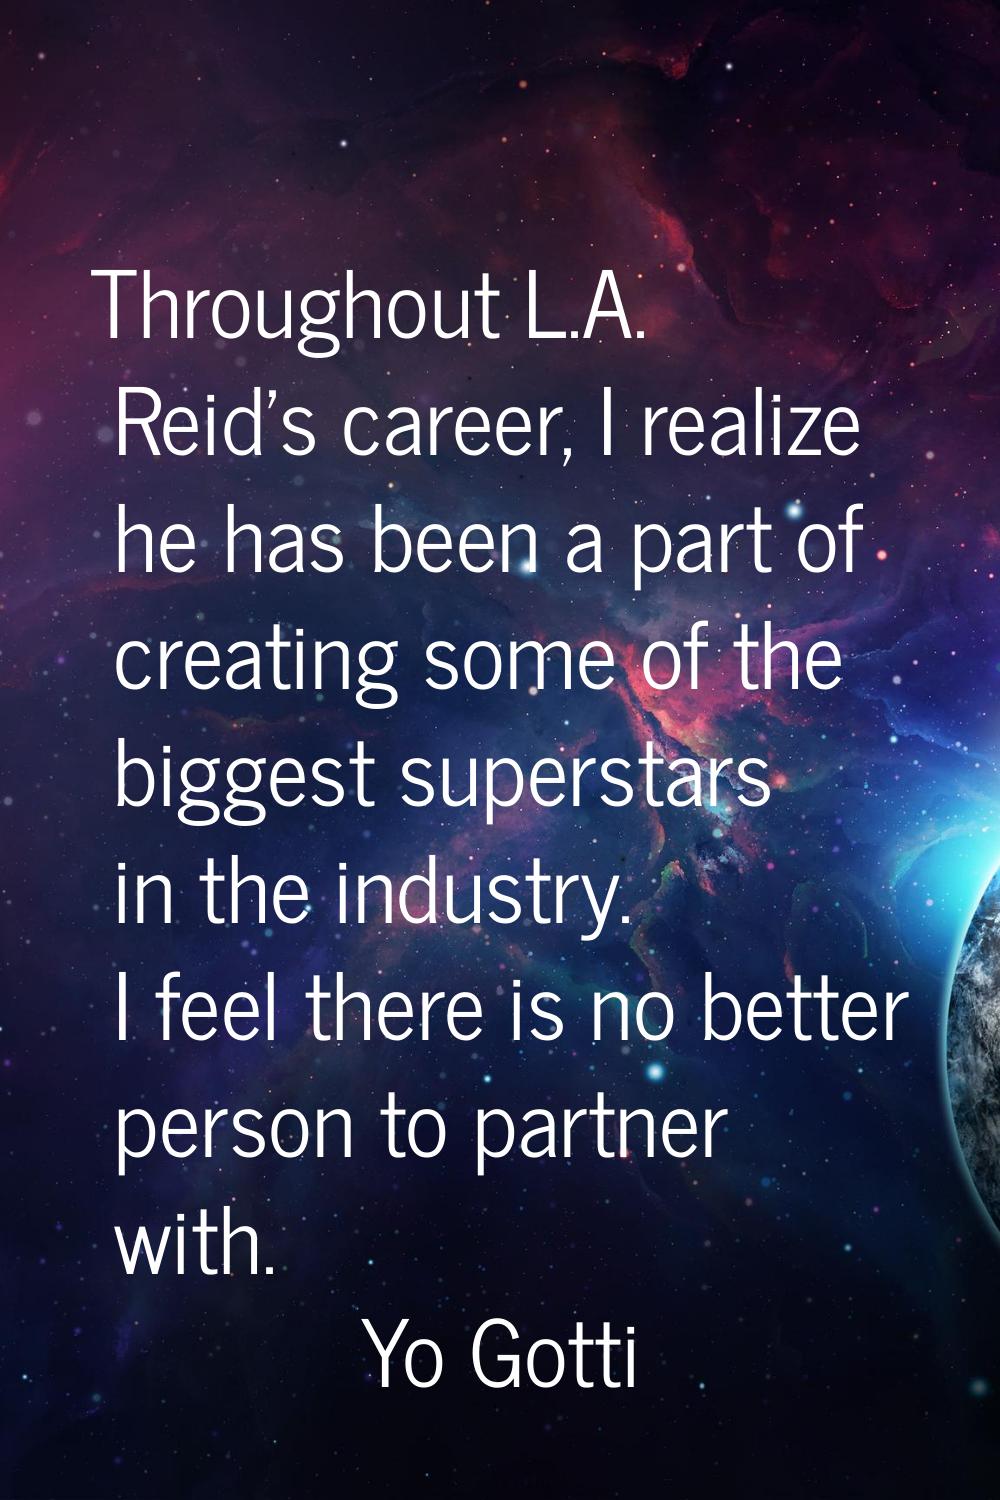 Throughout L.A. Reid's career, I realize he has been a part of creating some of the biggest superst